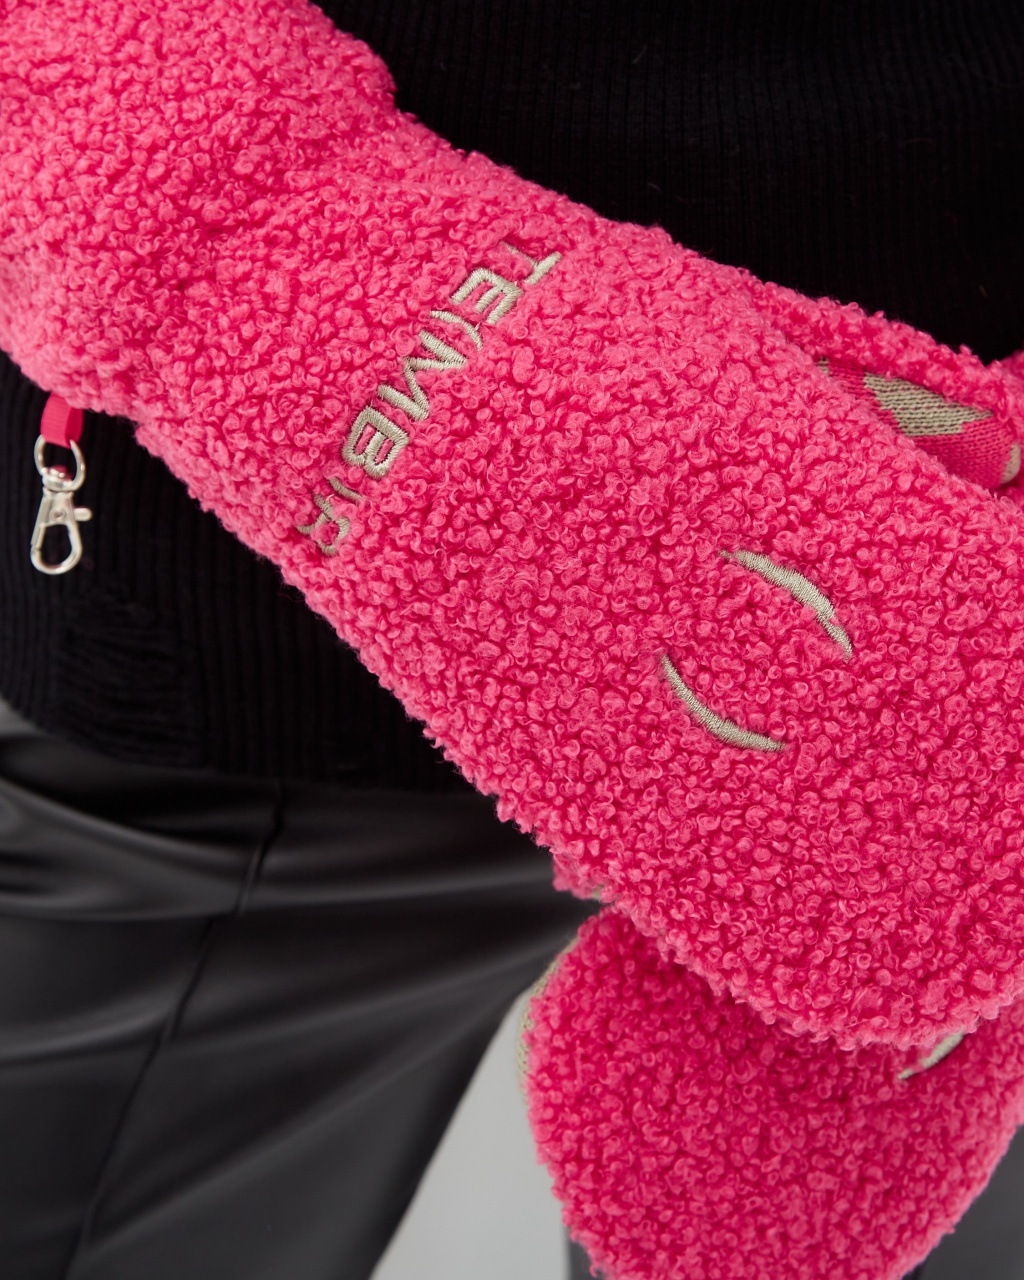 Pink Urban Bunny knitted gloves